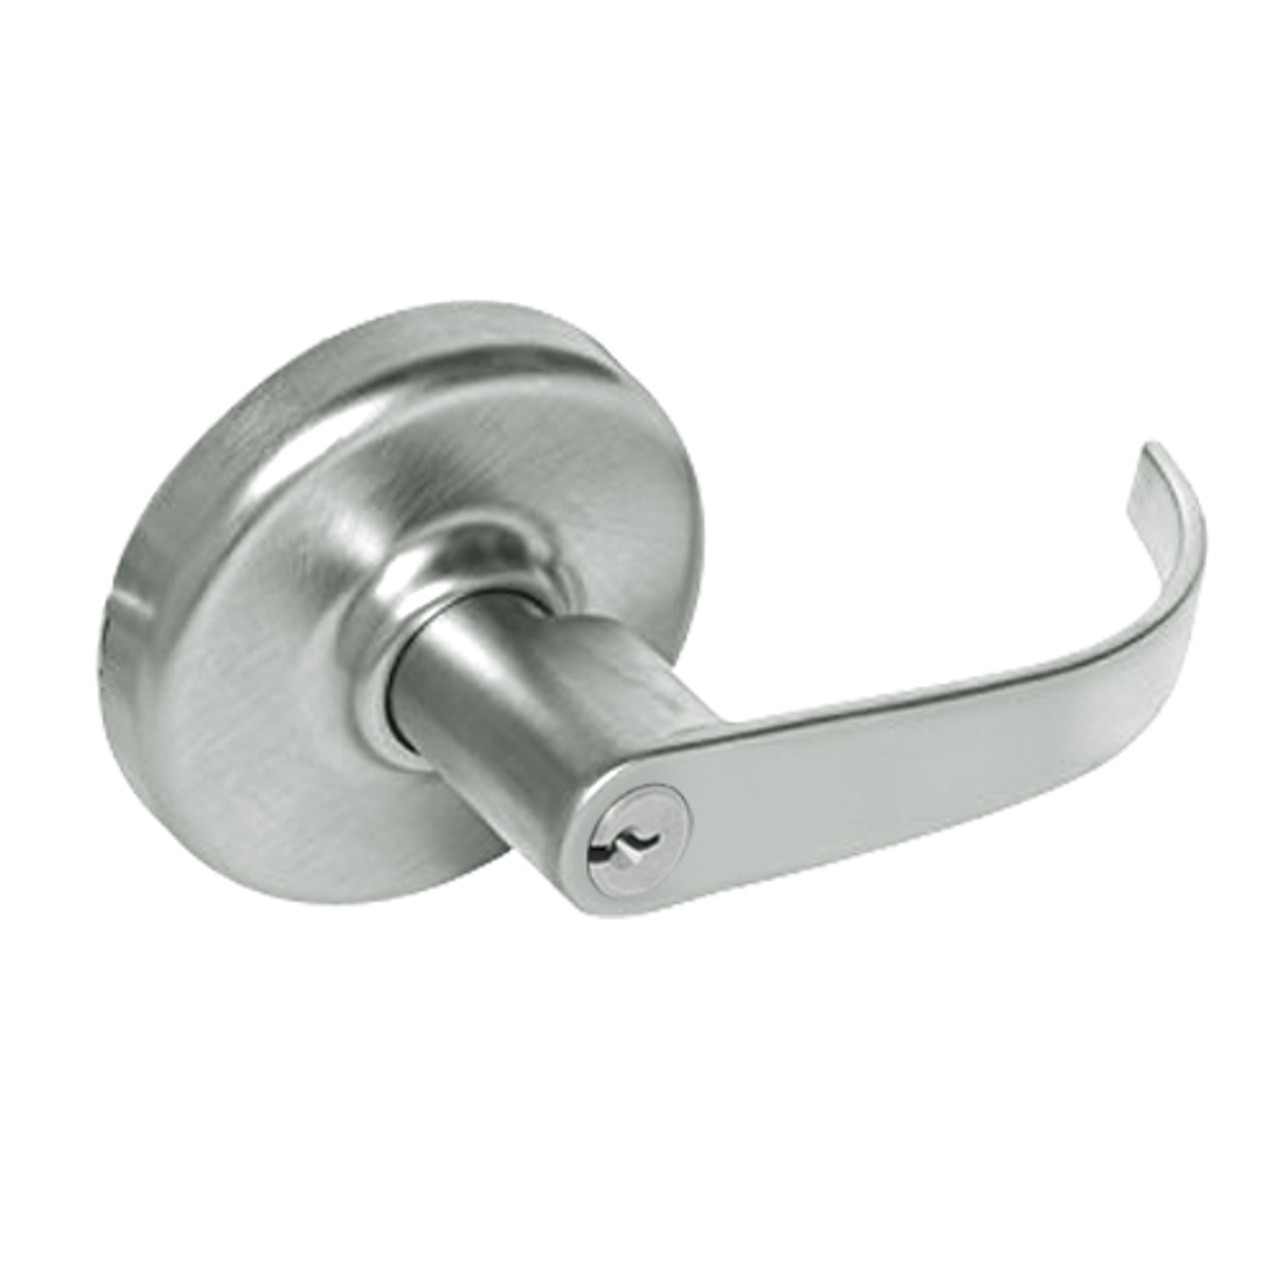 CL3391-PZD-618 Corbin CL3300 Series Extra Heavy Duty Keyed with Turnpiece Cylindrical Locksets with Princeton Lever in Bright Nickel Plated Finish